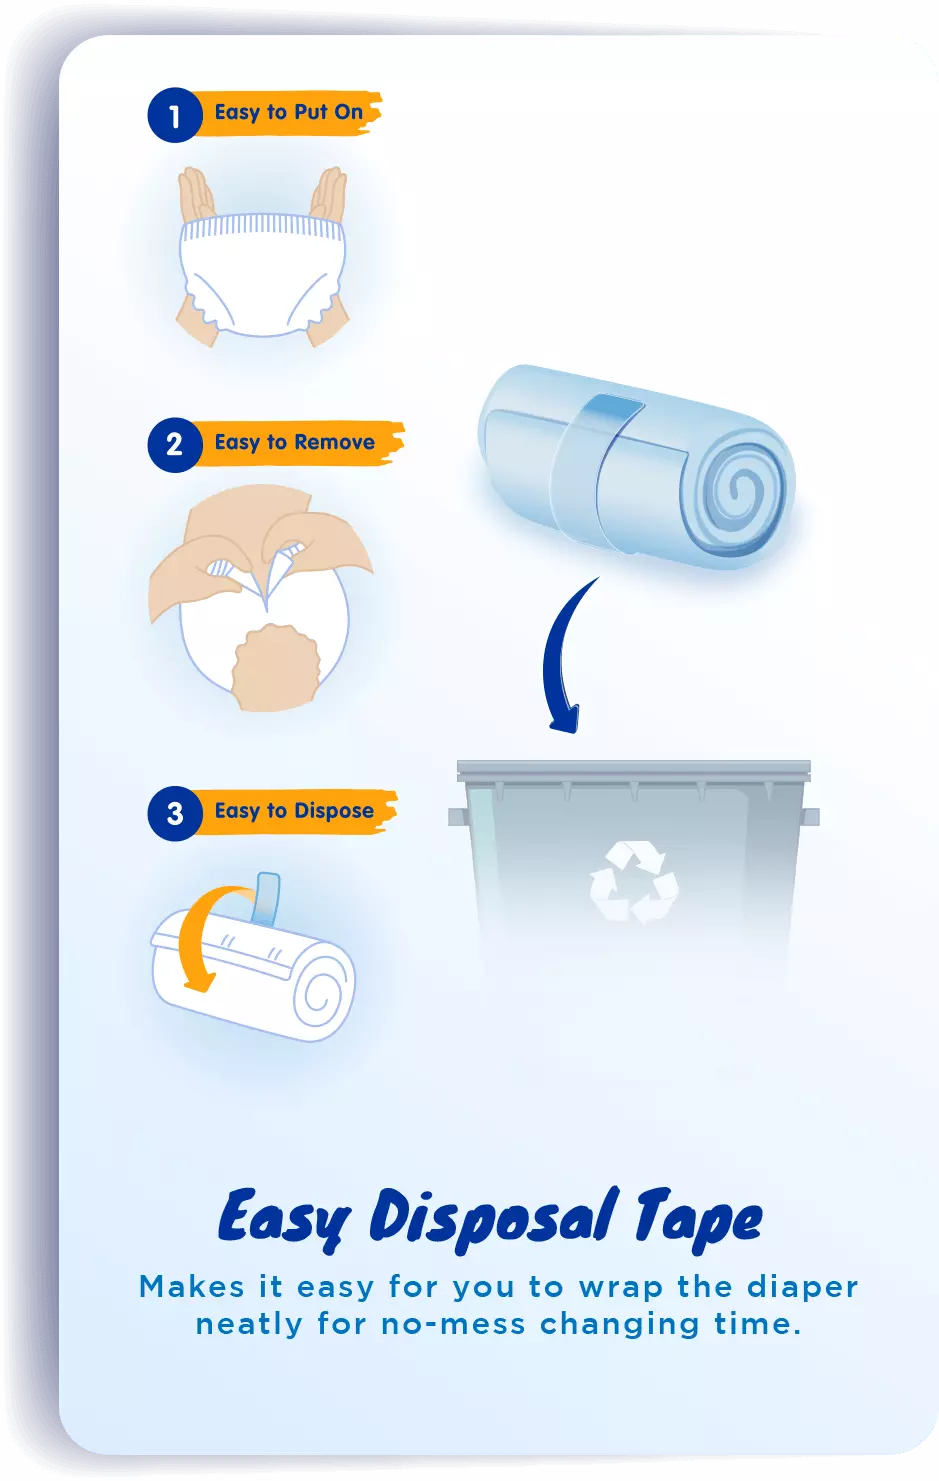 Easy Disposal Tape: Makes it easy for you to wrap the diaper neatly for no-mess changing time.